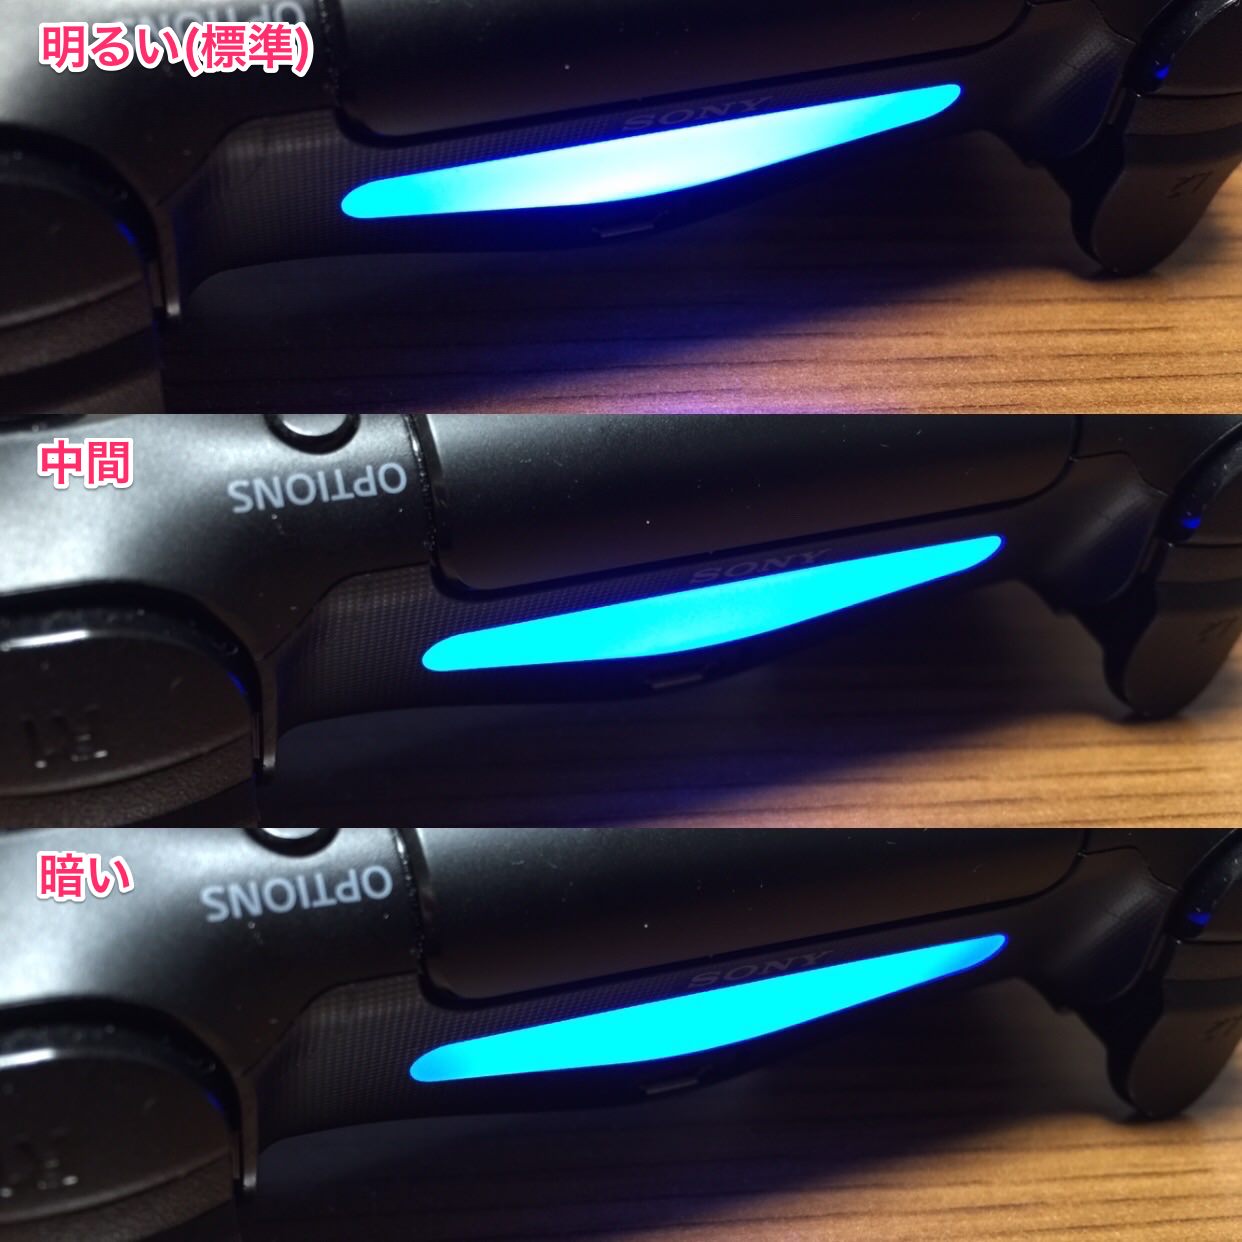 How to adjust to luminous energy of controller for playstation 4 06